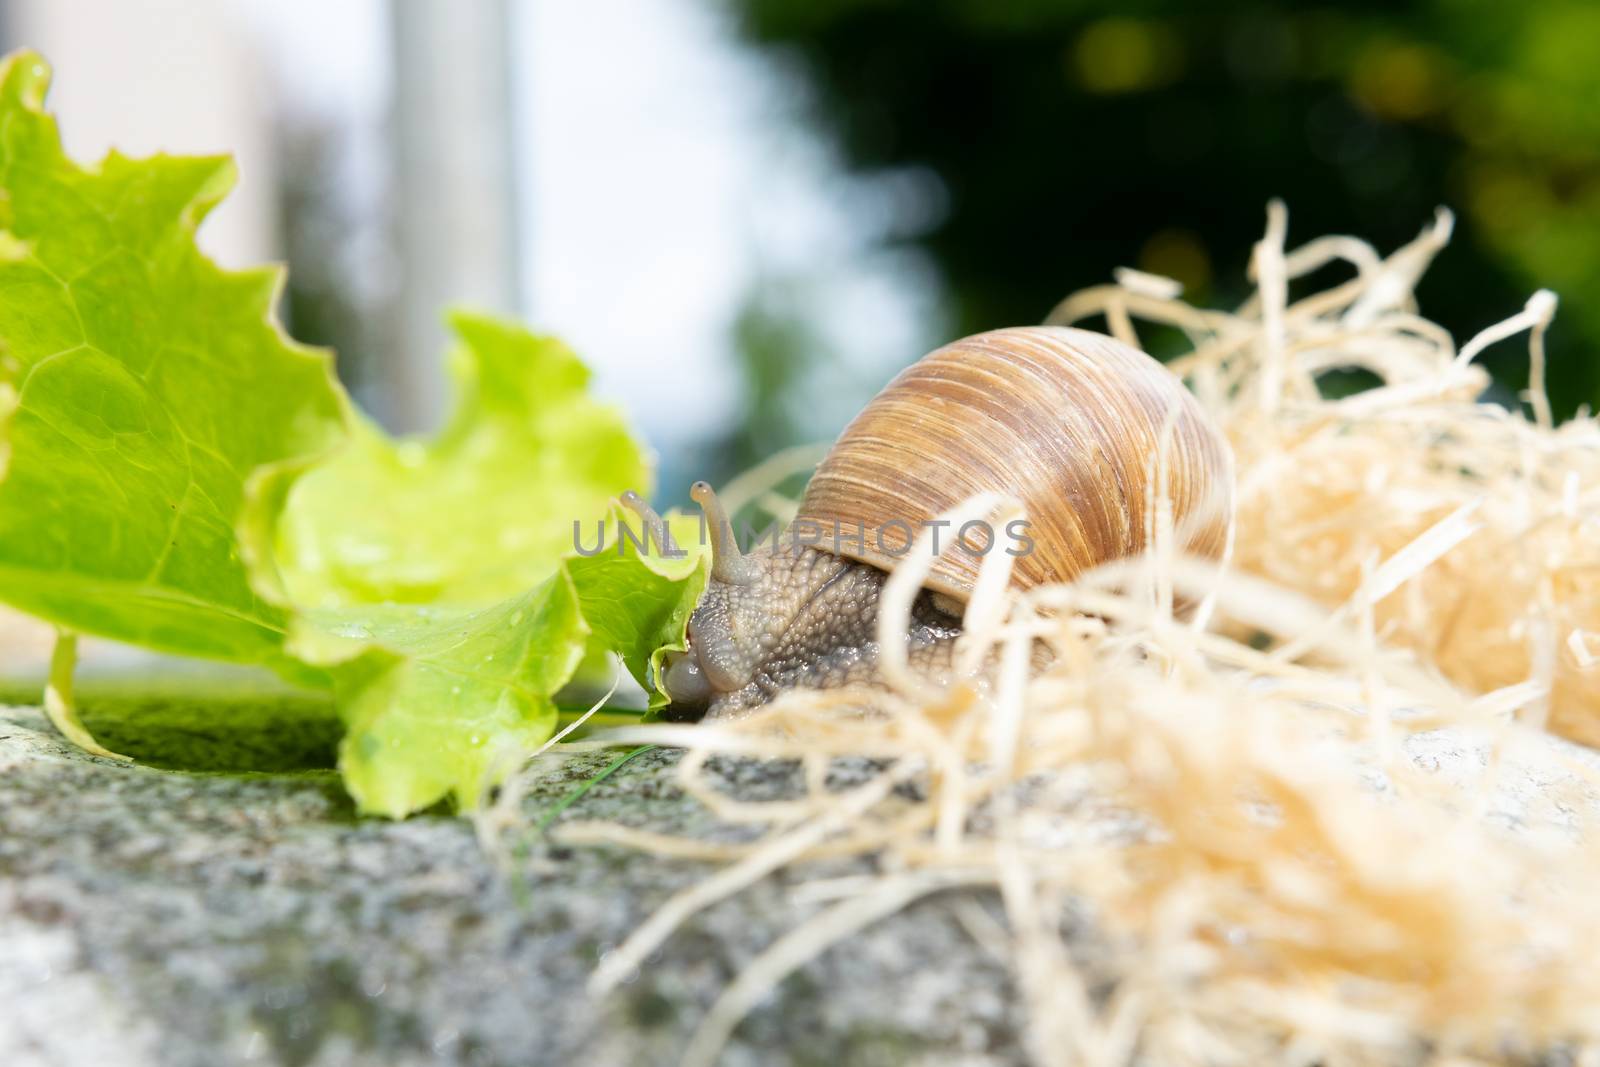 Macro close-up of a Burgundy snail eating a lettuce leaf by pulling it with her Radula into her mouth by Umtsga